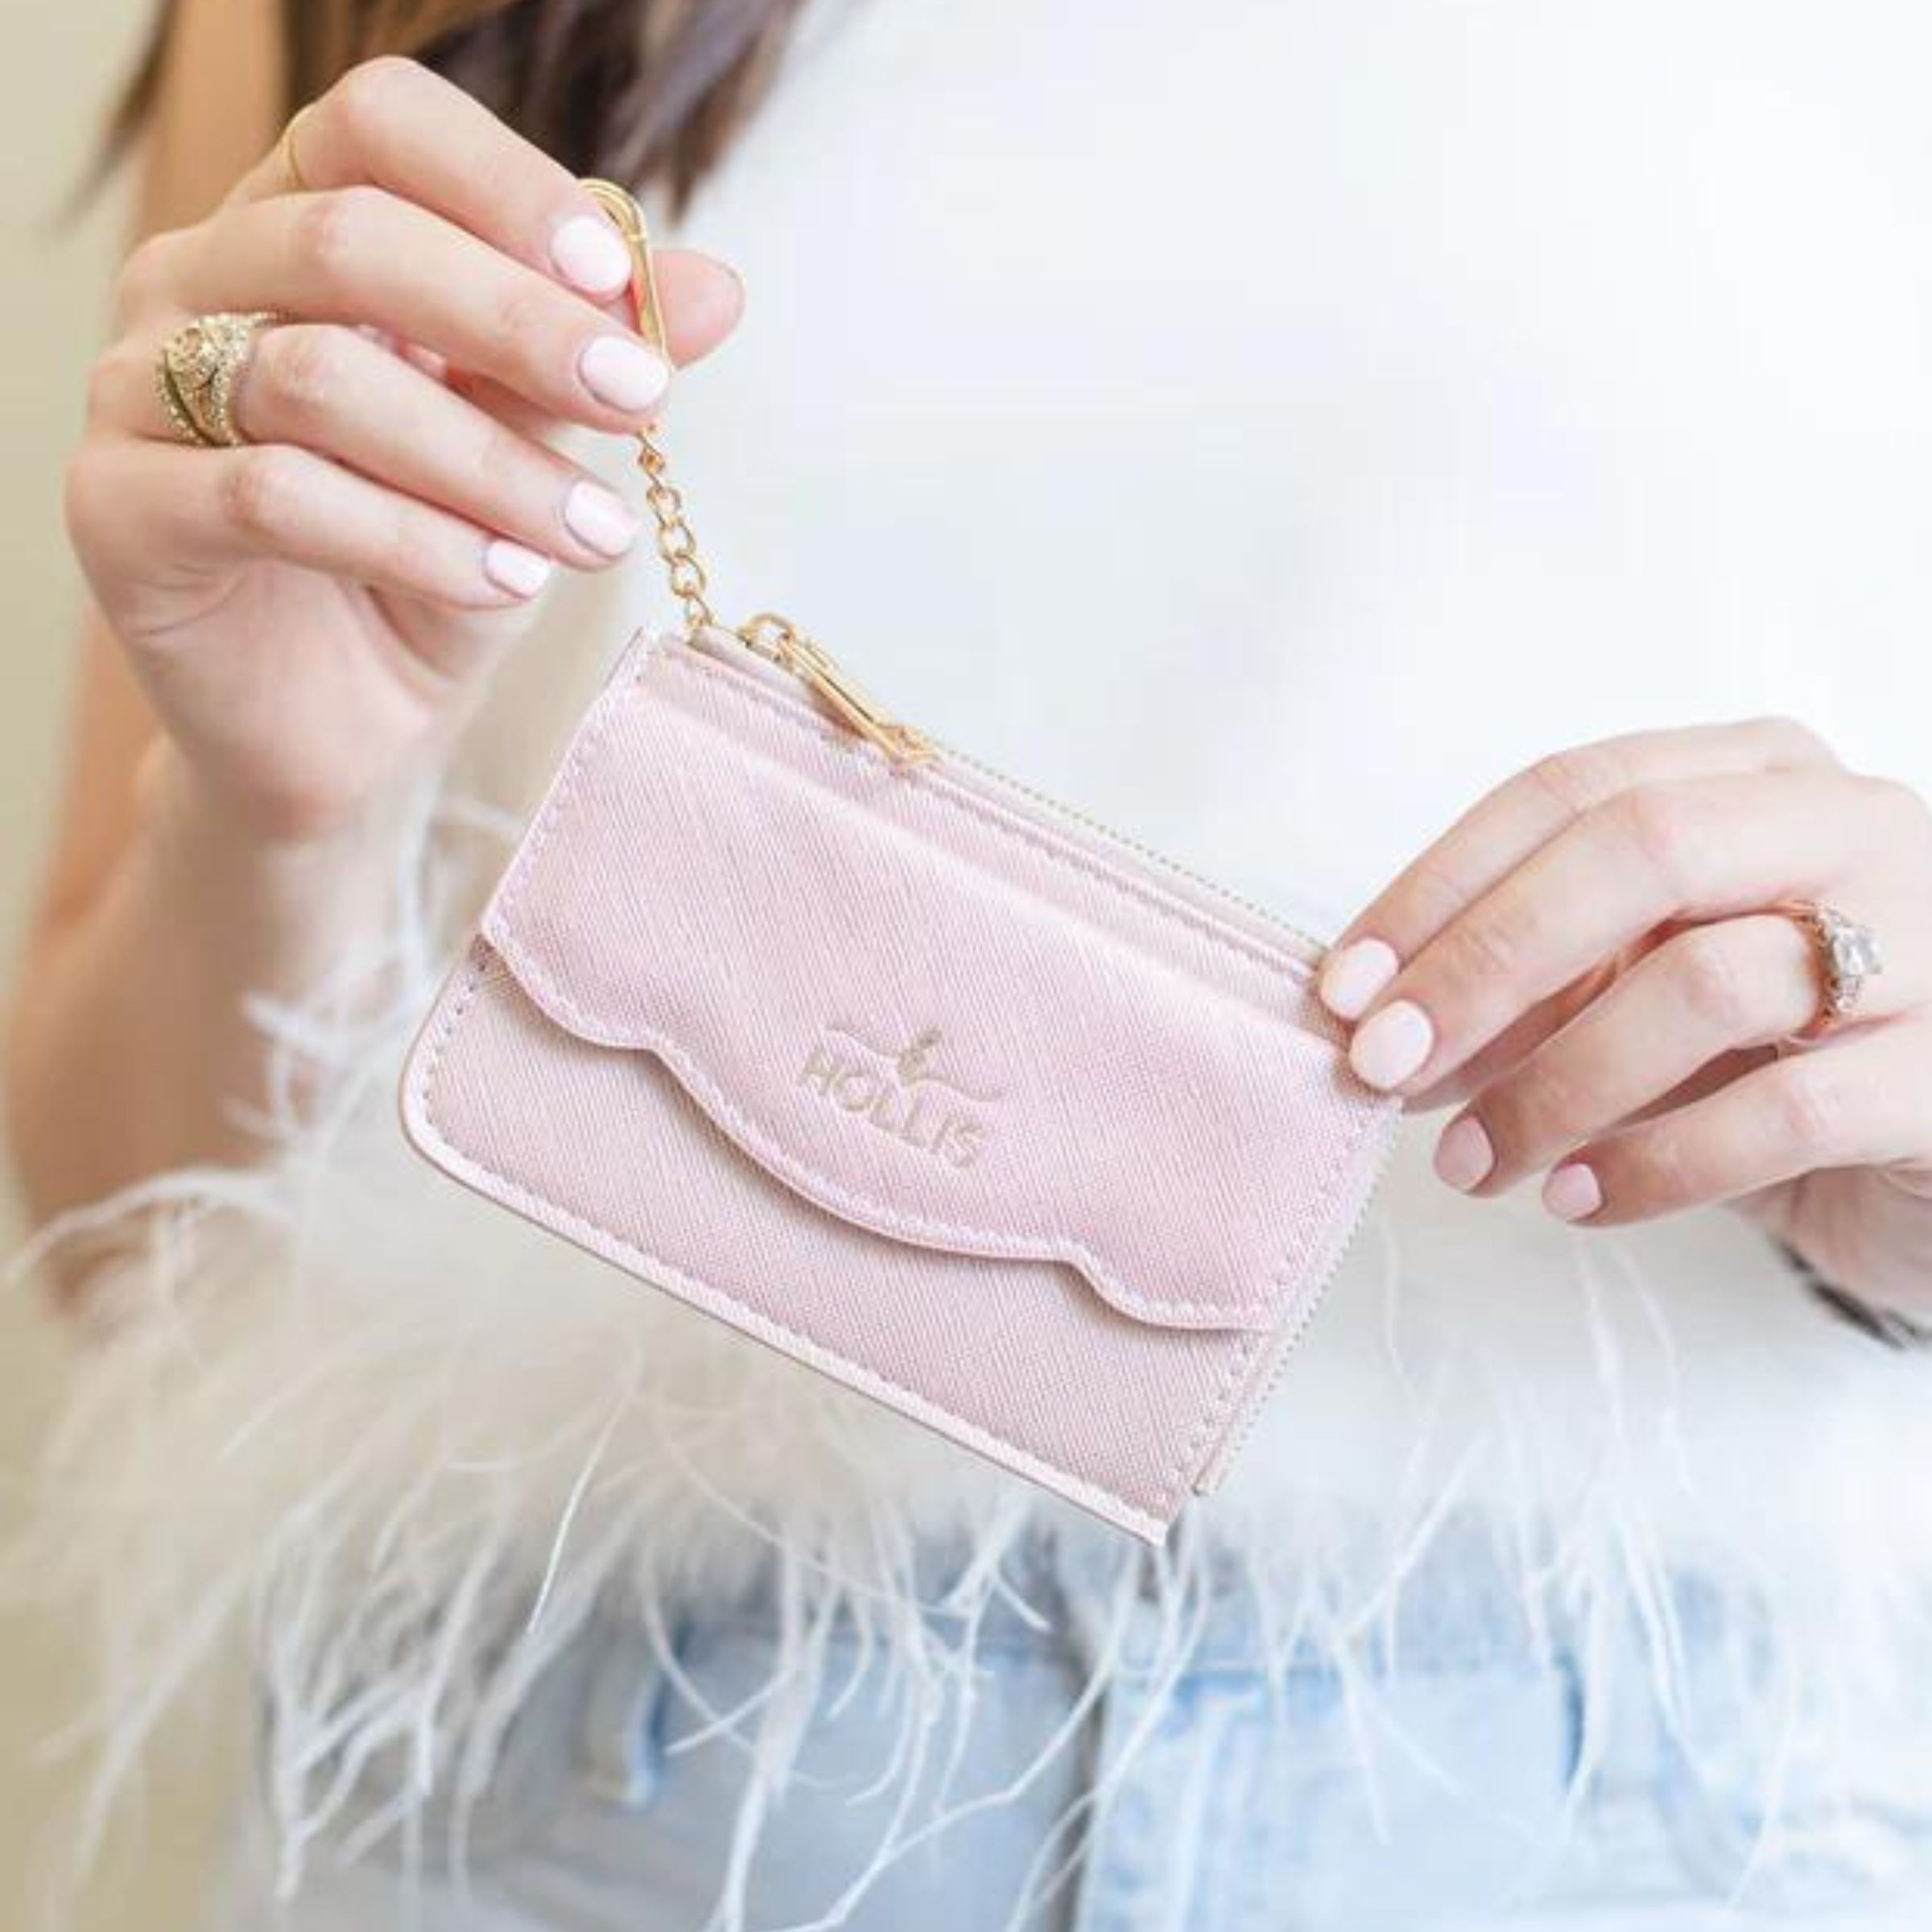 Pictured is light pink card holder with a gold key ring. This card holder also has the brand "HOLLIS" in the center. This card holder is pictured by someone holding it in front of a white feather top. 